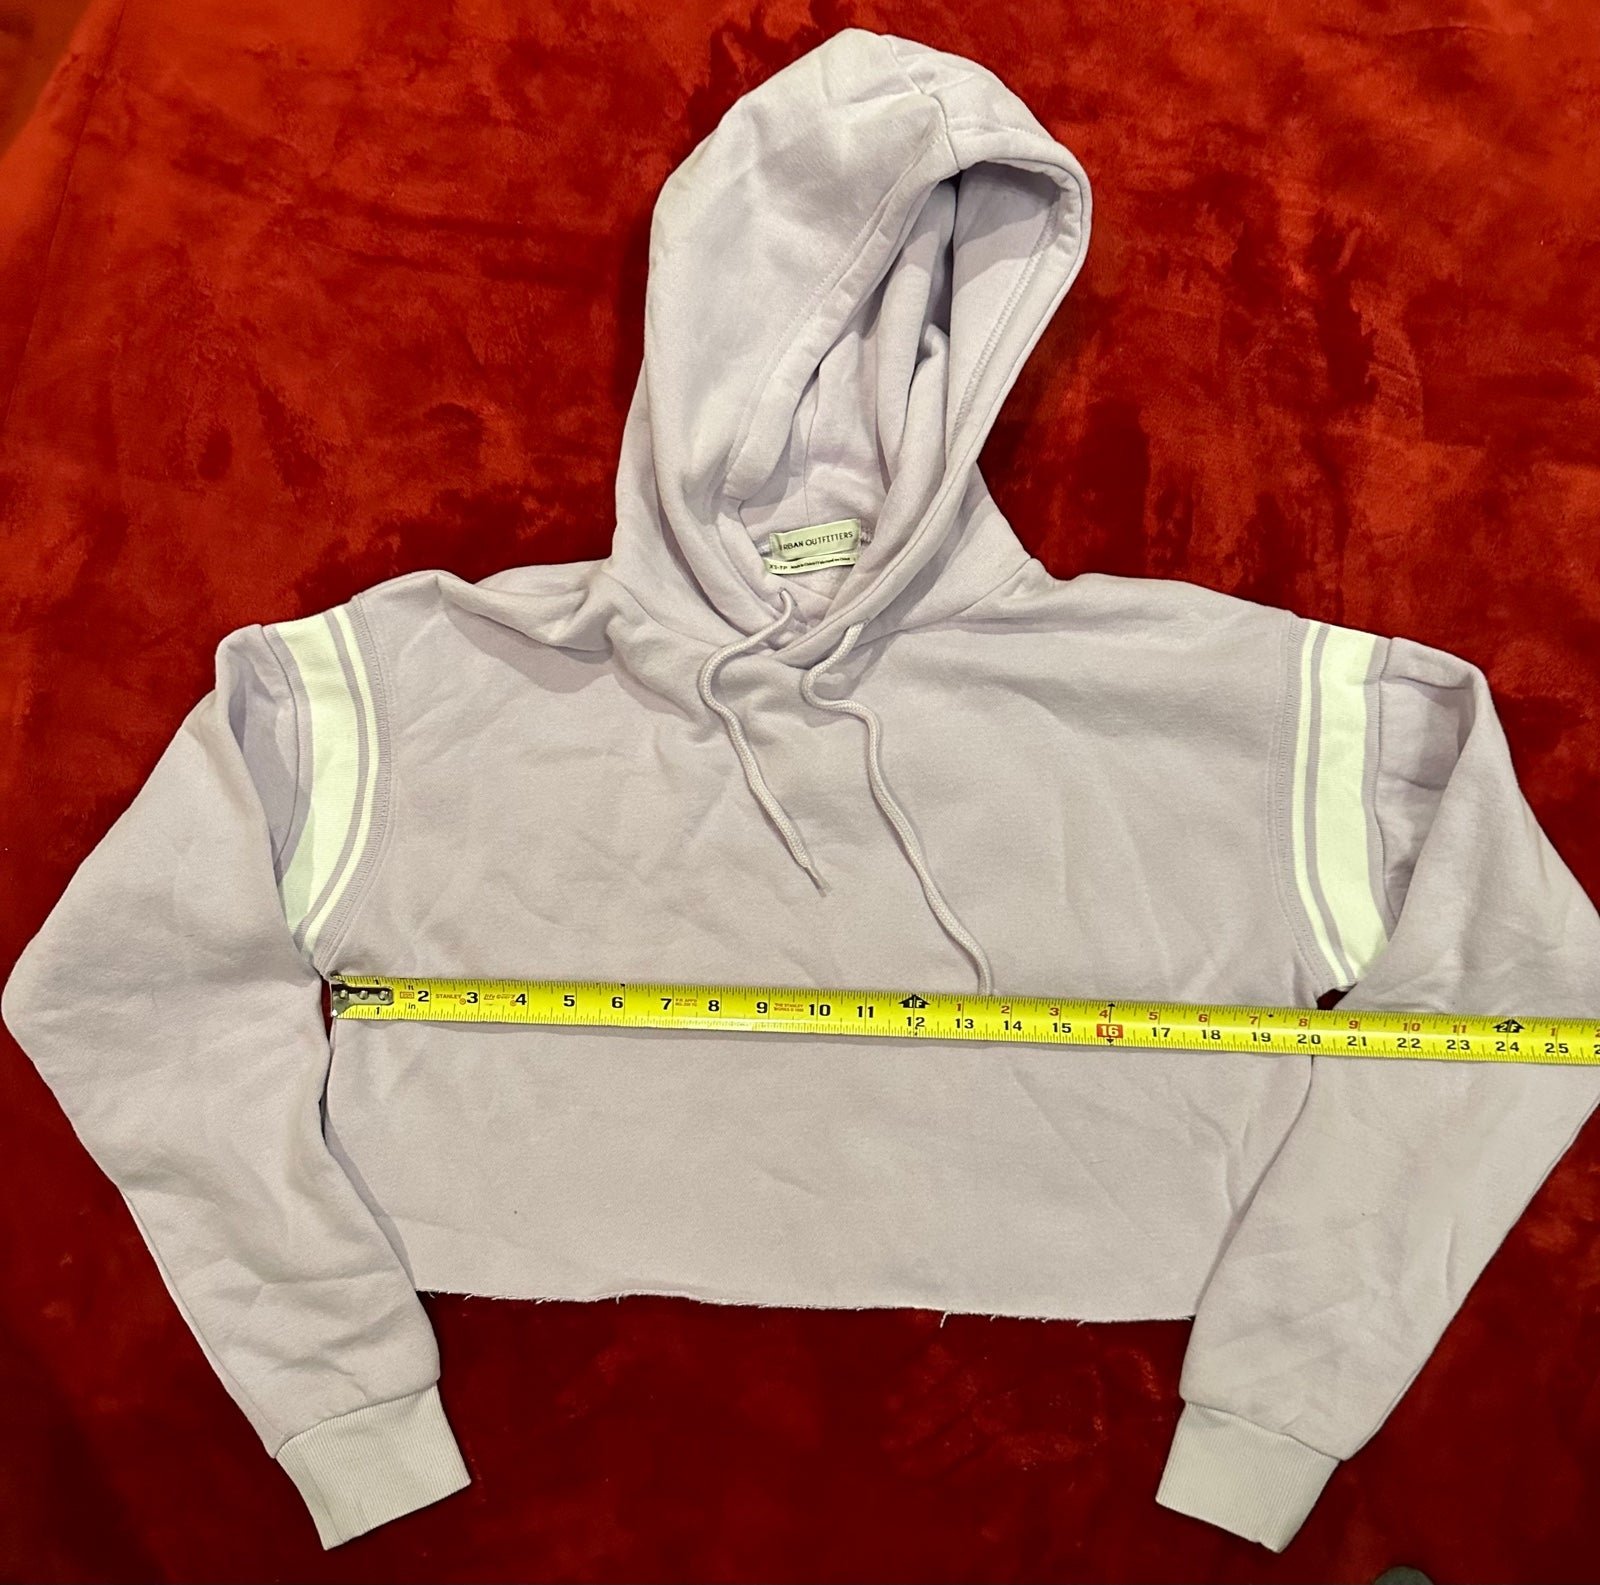 High quality Urban Outfitters XS Hoodie iIKaWm749 Count